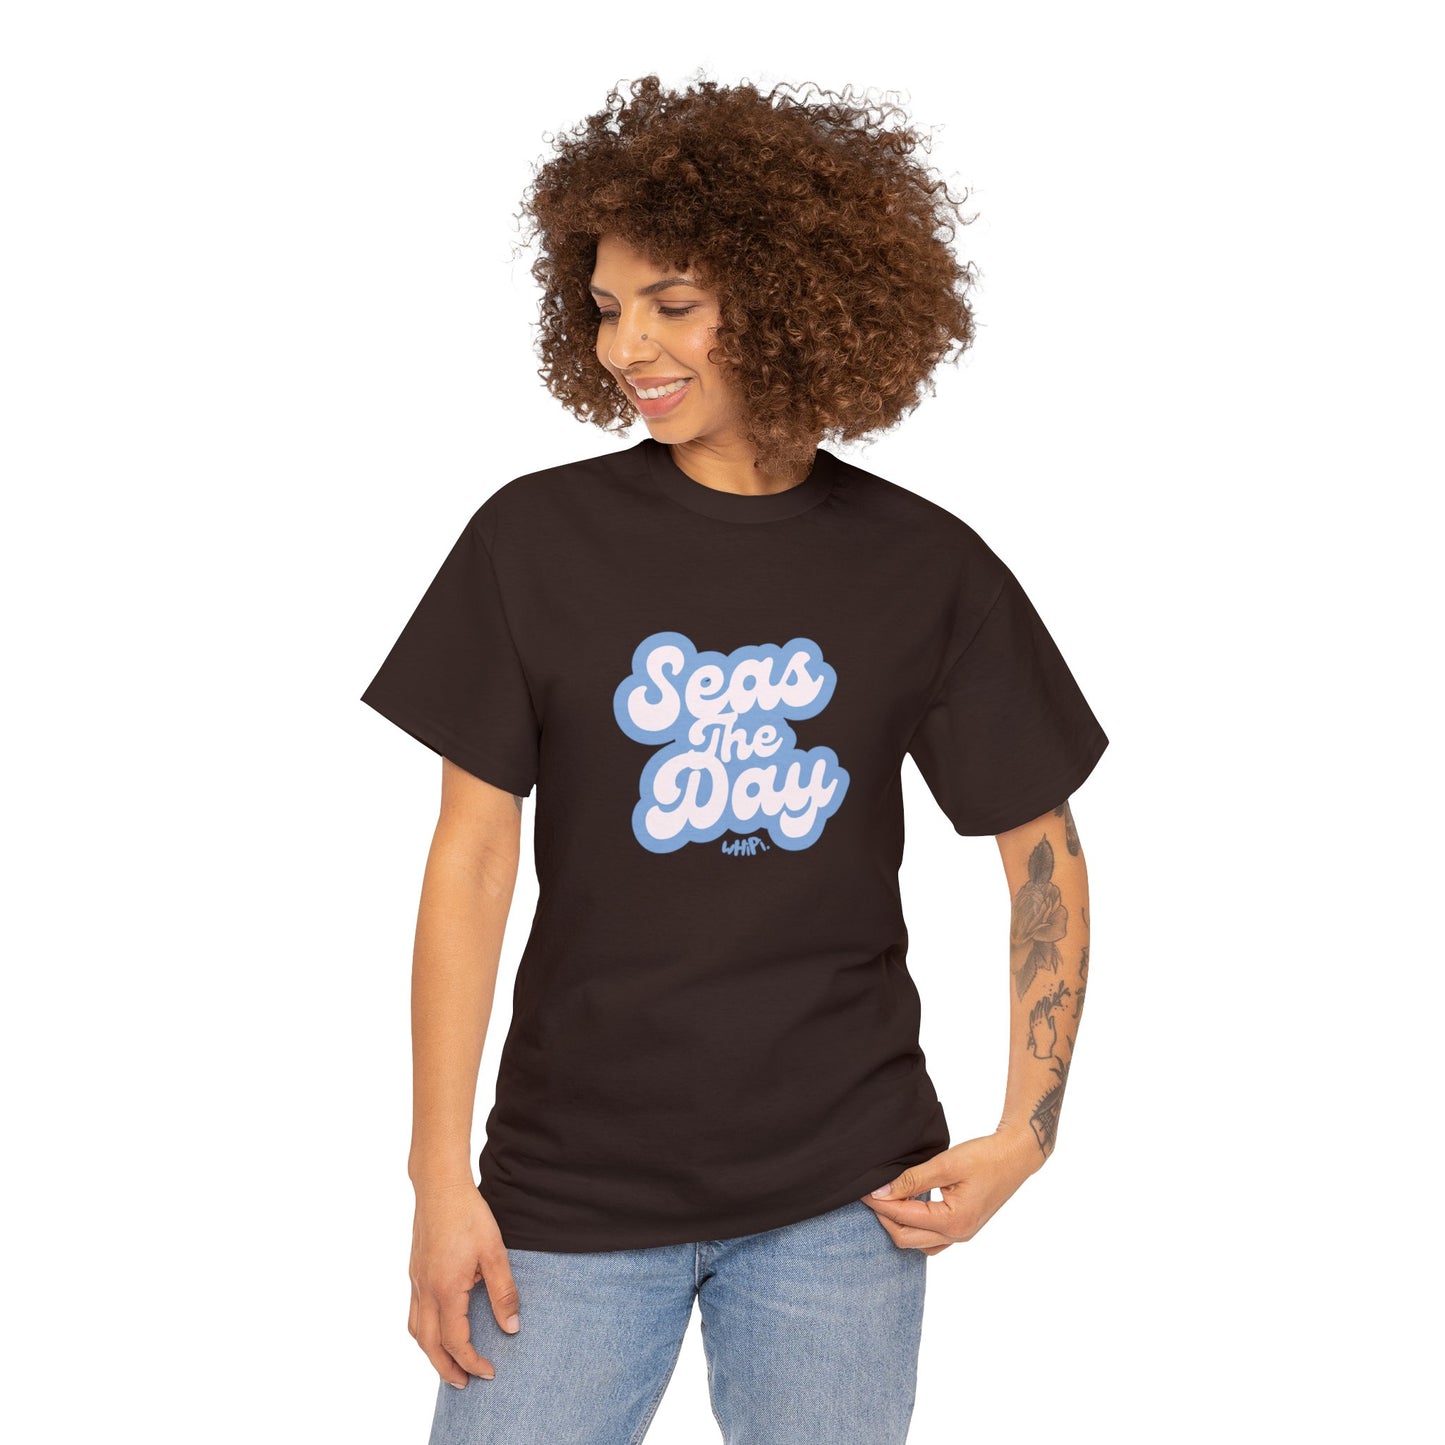 Seas The Day T-Shirt